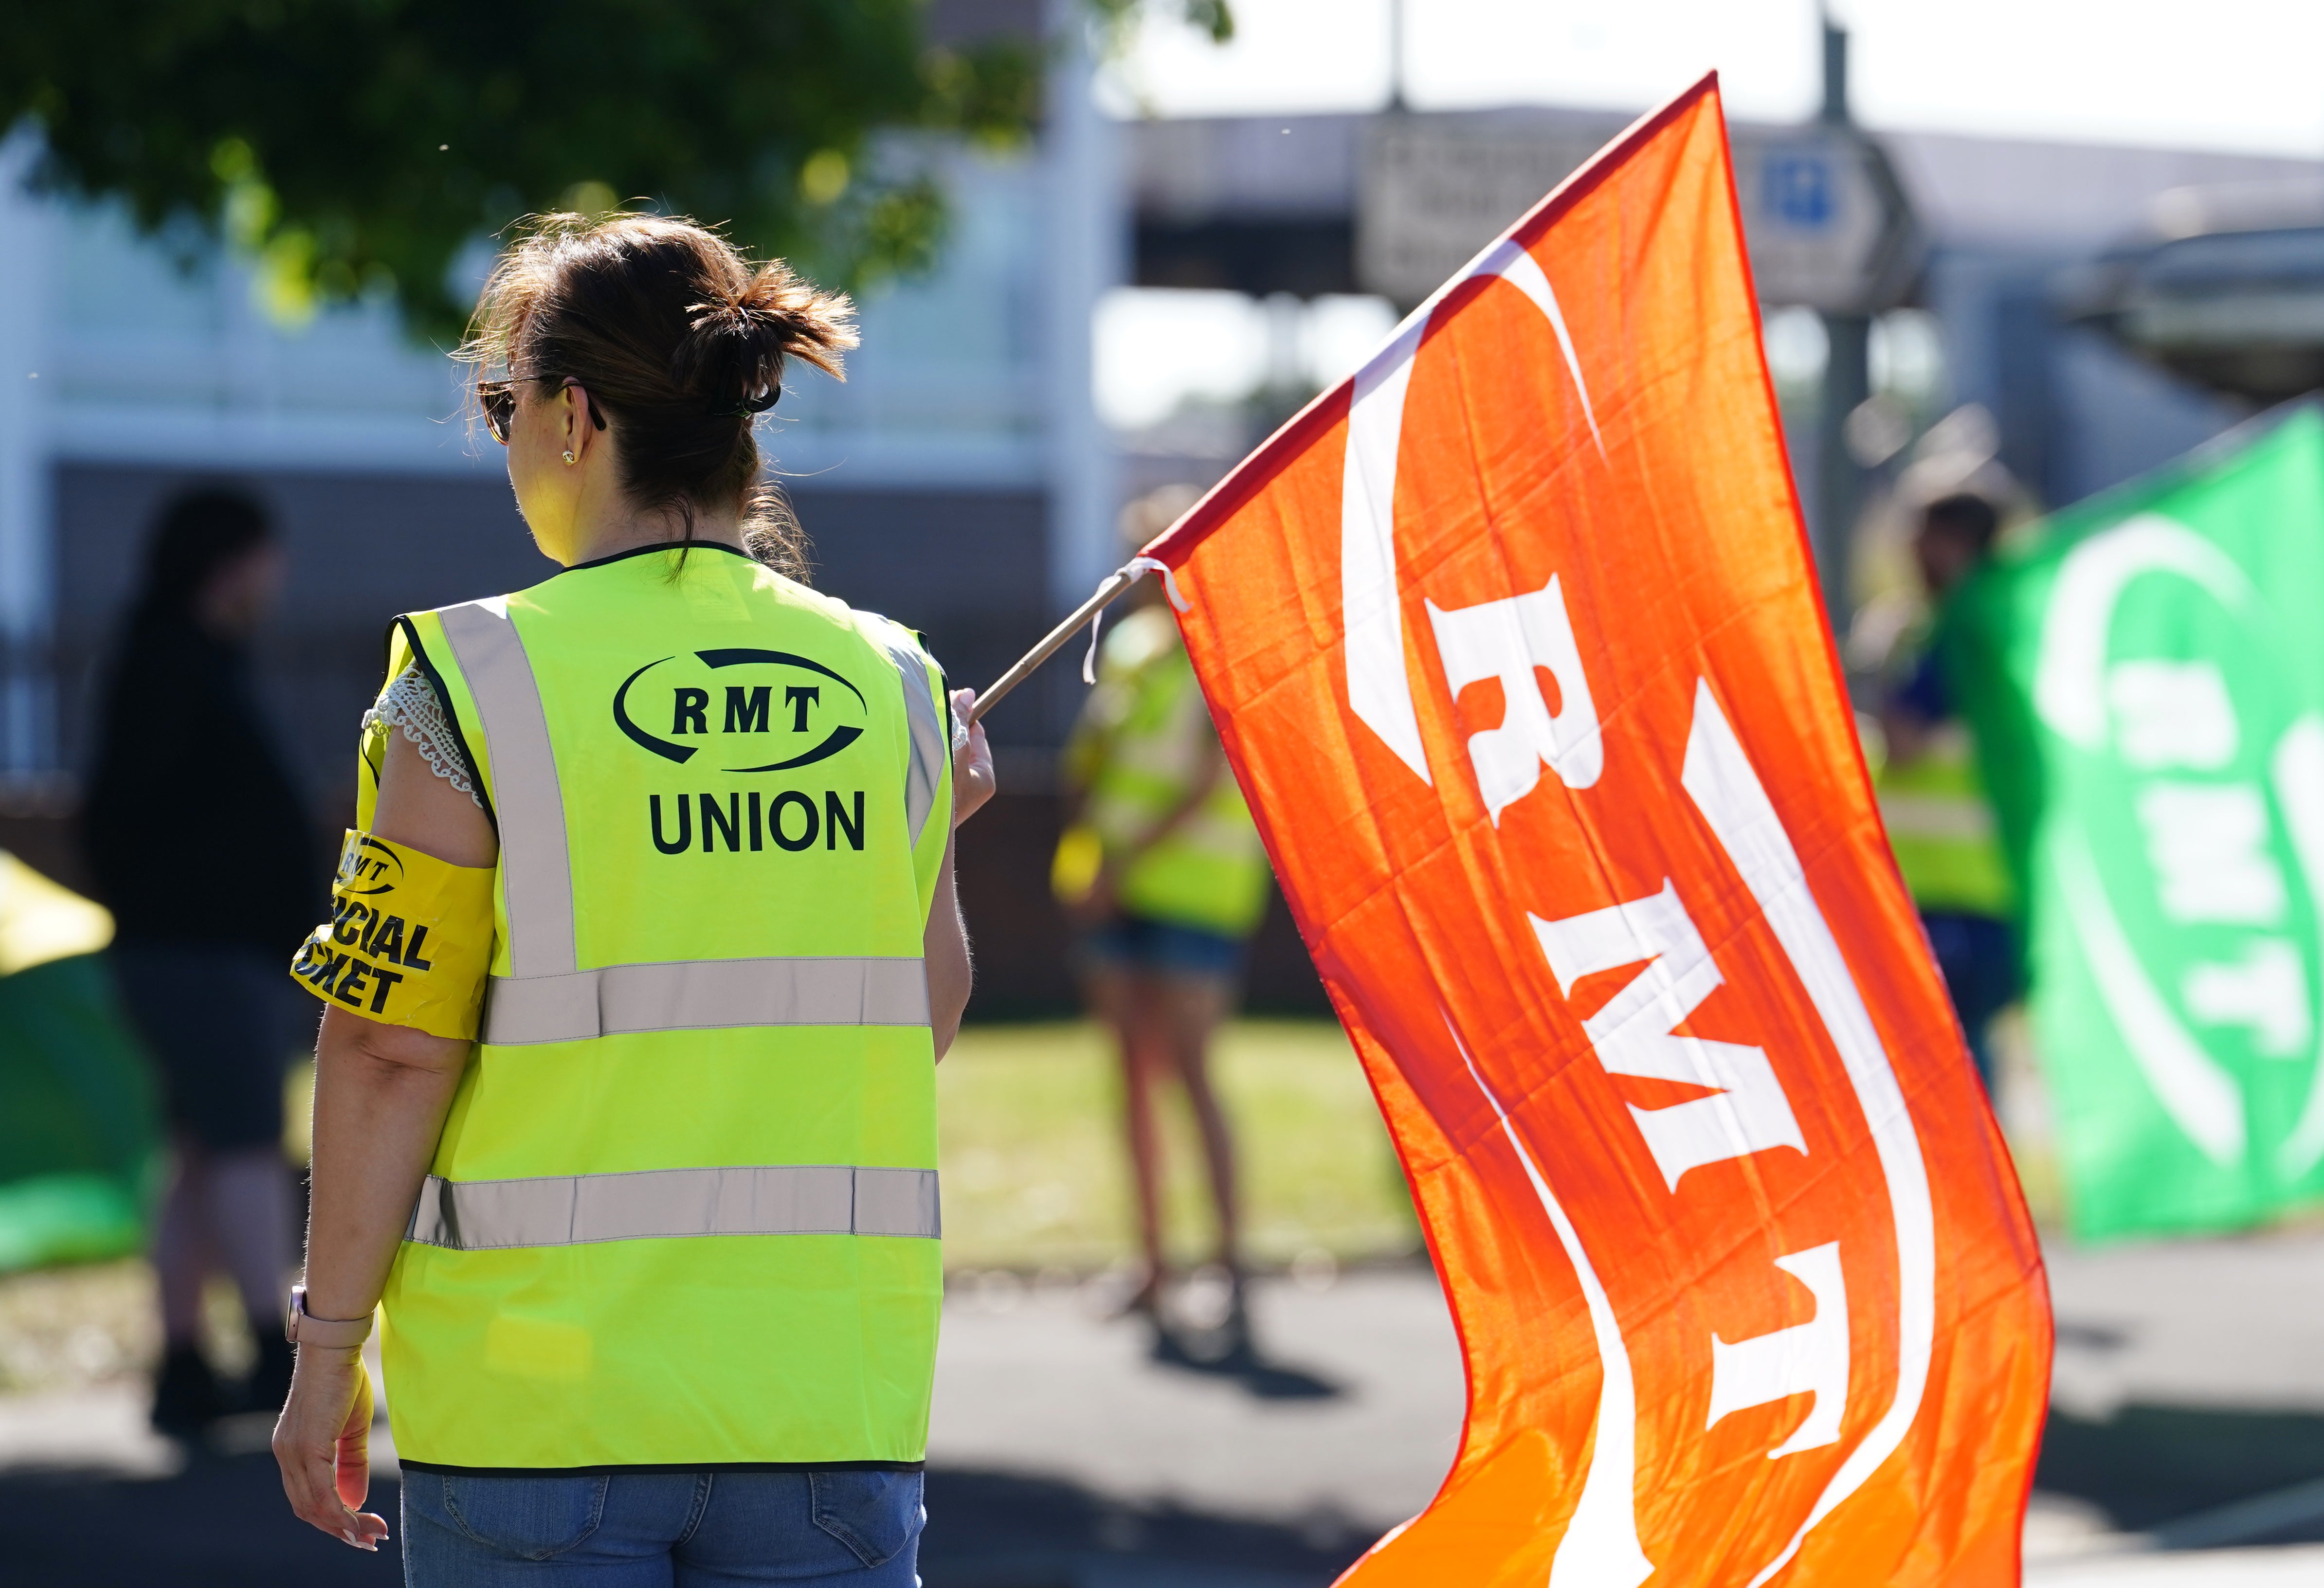 The RMT picket line at Shrub Hill train station in Worcestershire (David Davies/PA)